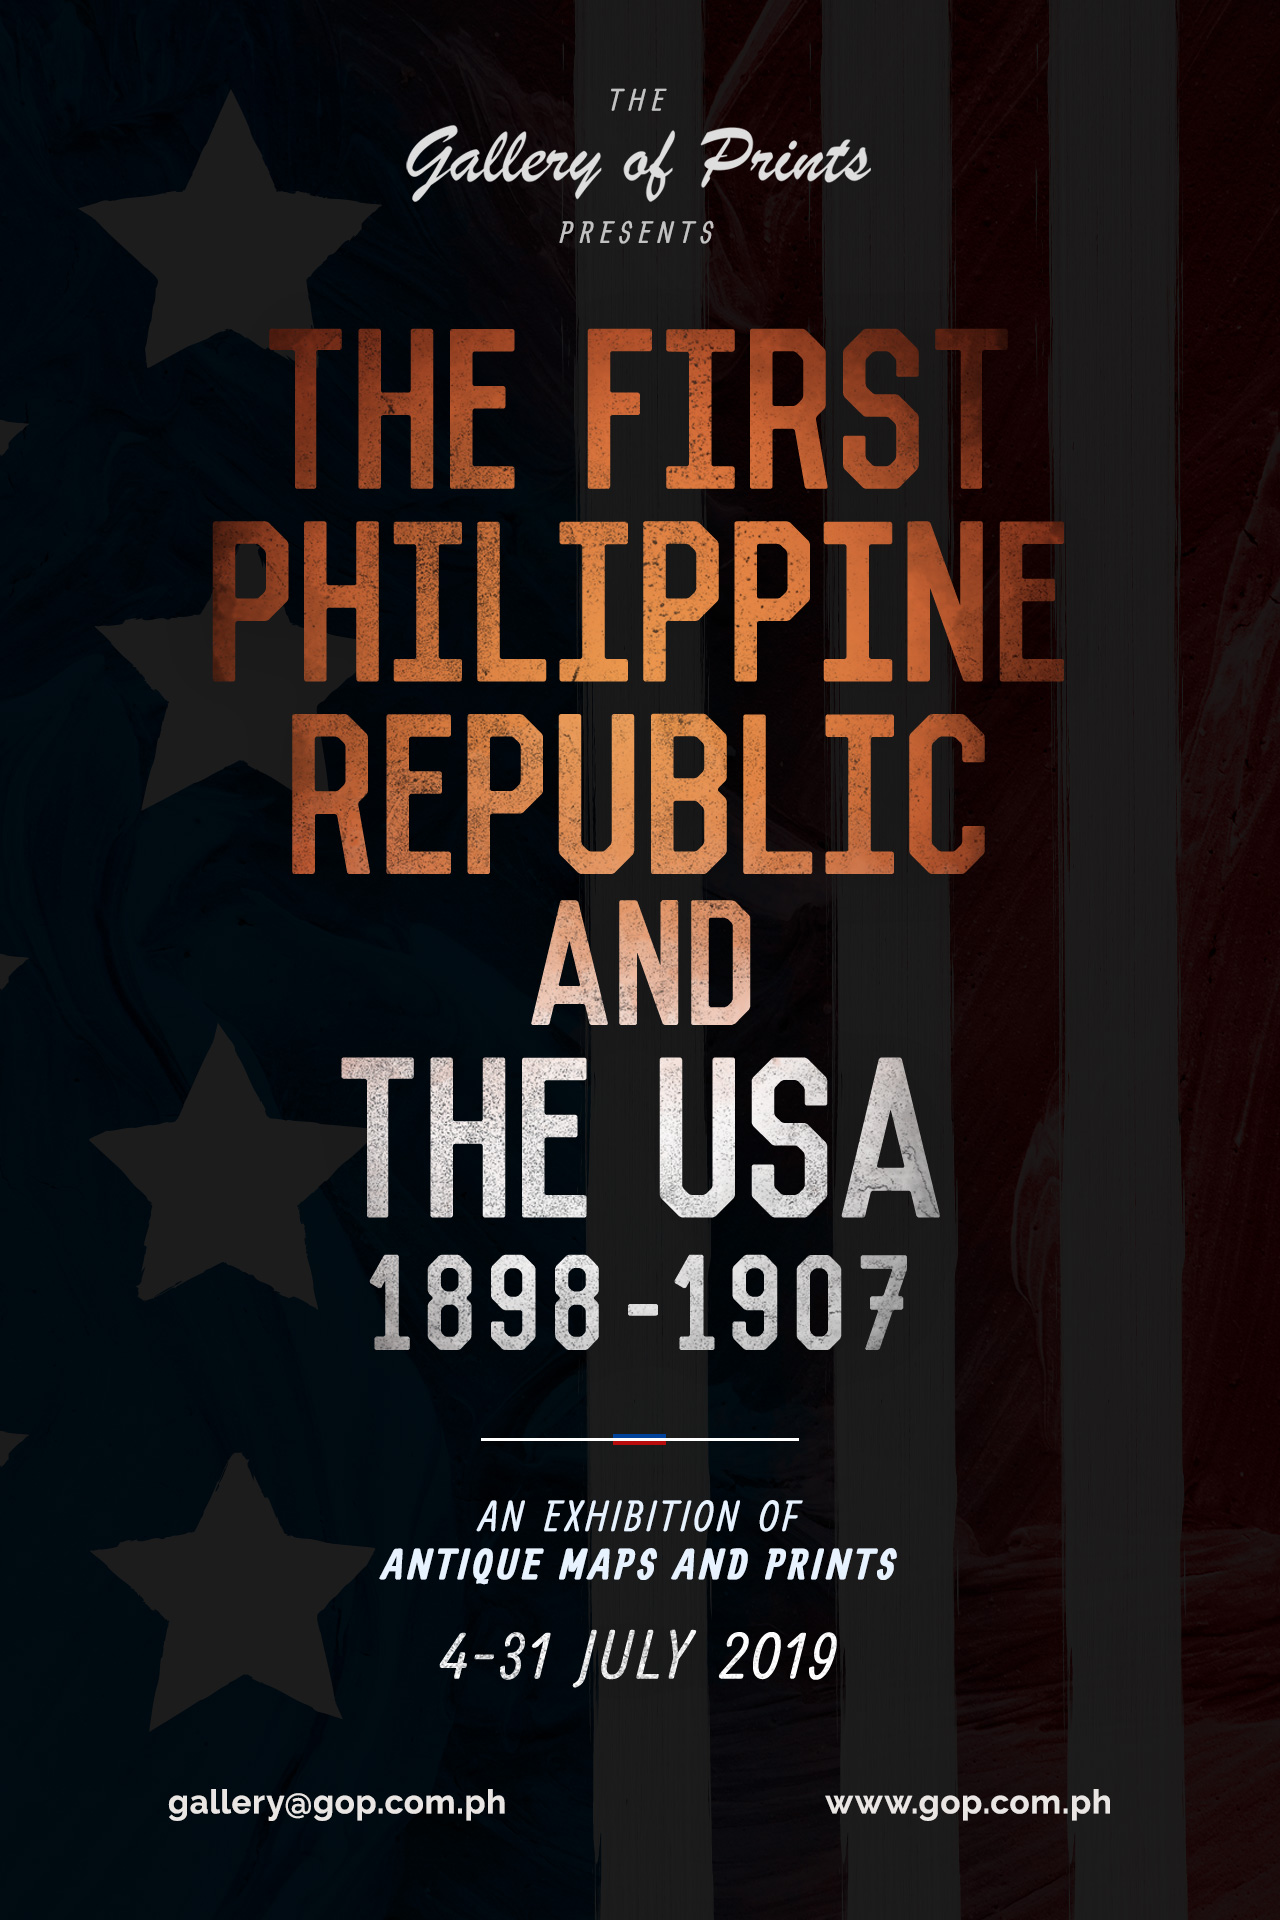 The First Philippine Republic and the USA